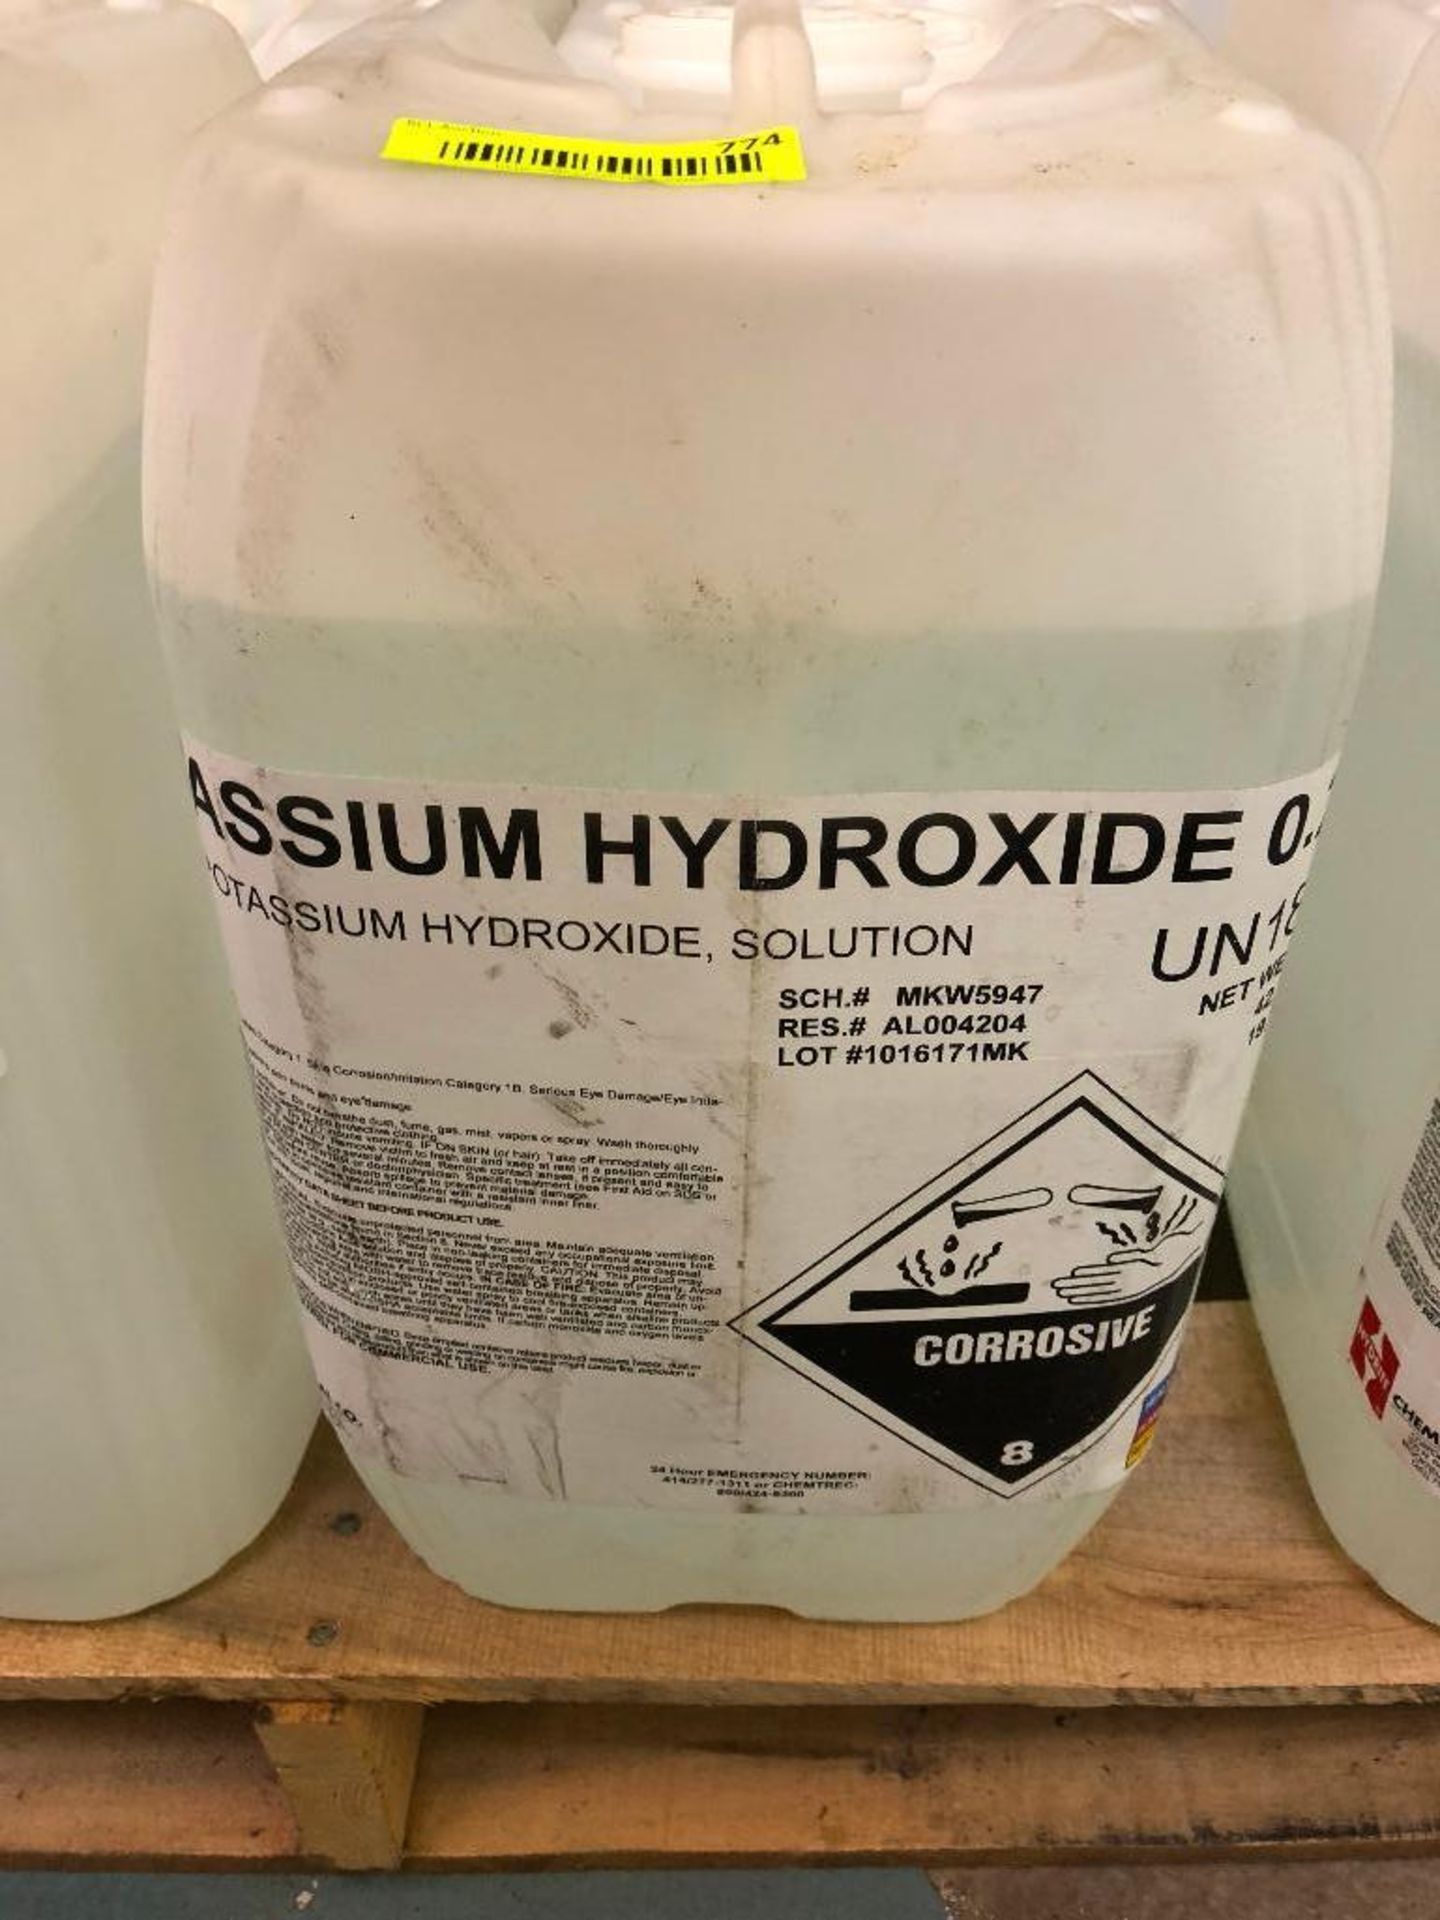 DESCRIPTION: (25) CONTAINERS OF POTASSIUM HYDROXIDE SOLUTION SIZE: 5 GALLON LOCATION: BACK BAY THIS